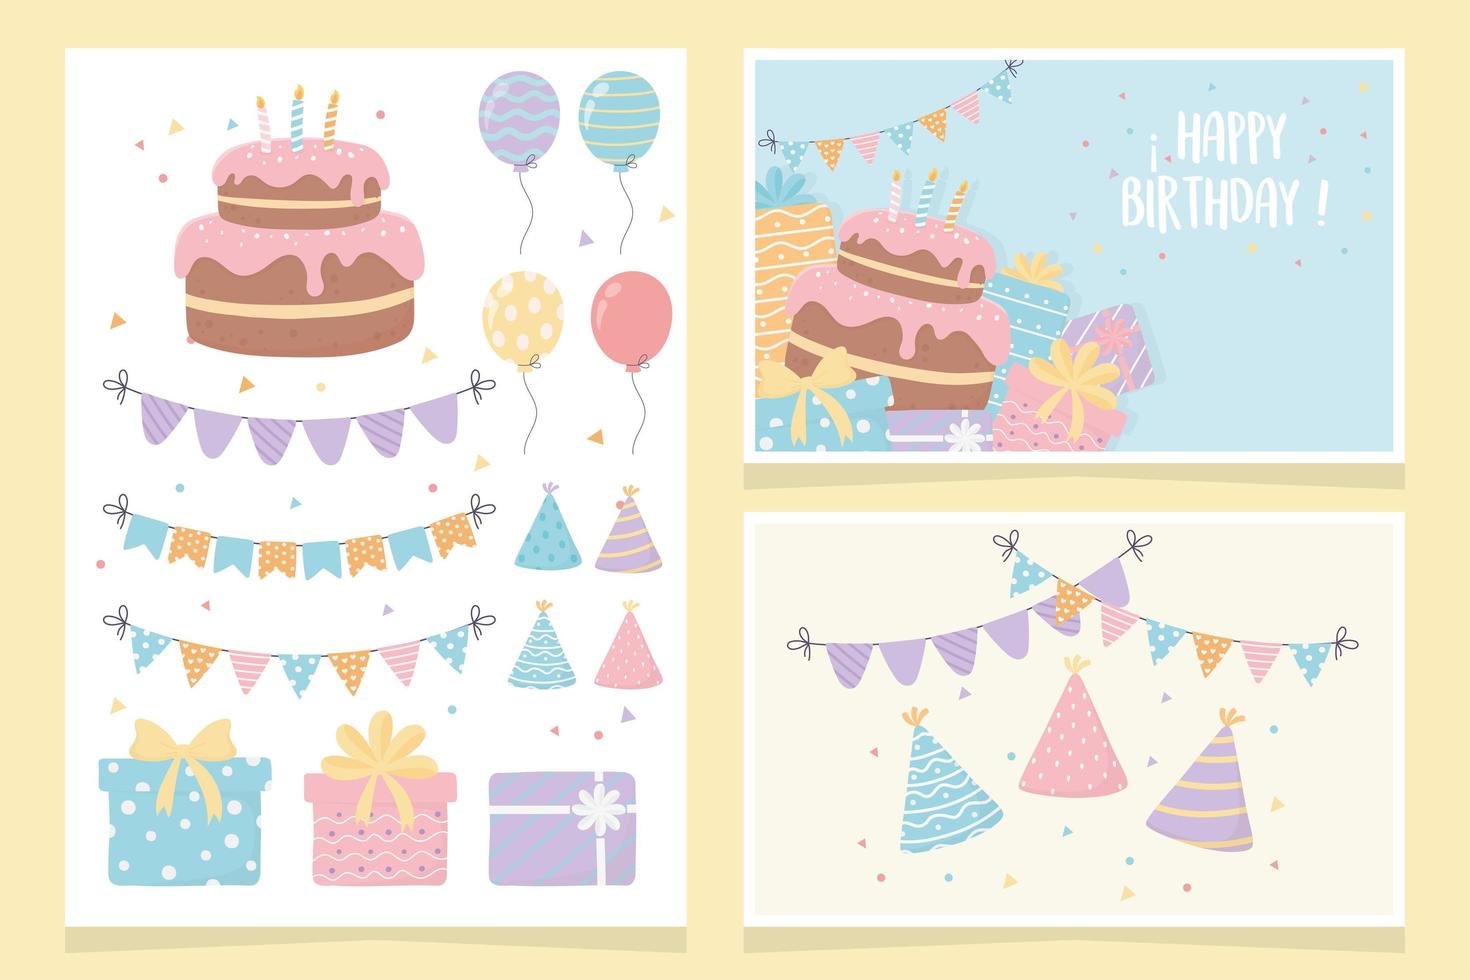 happy birthday cake gifts balloons pennants party decoration cards vector